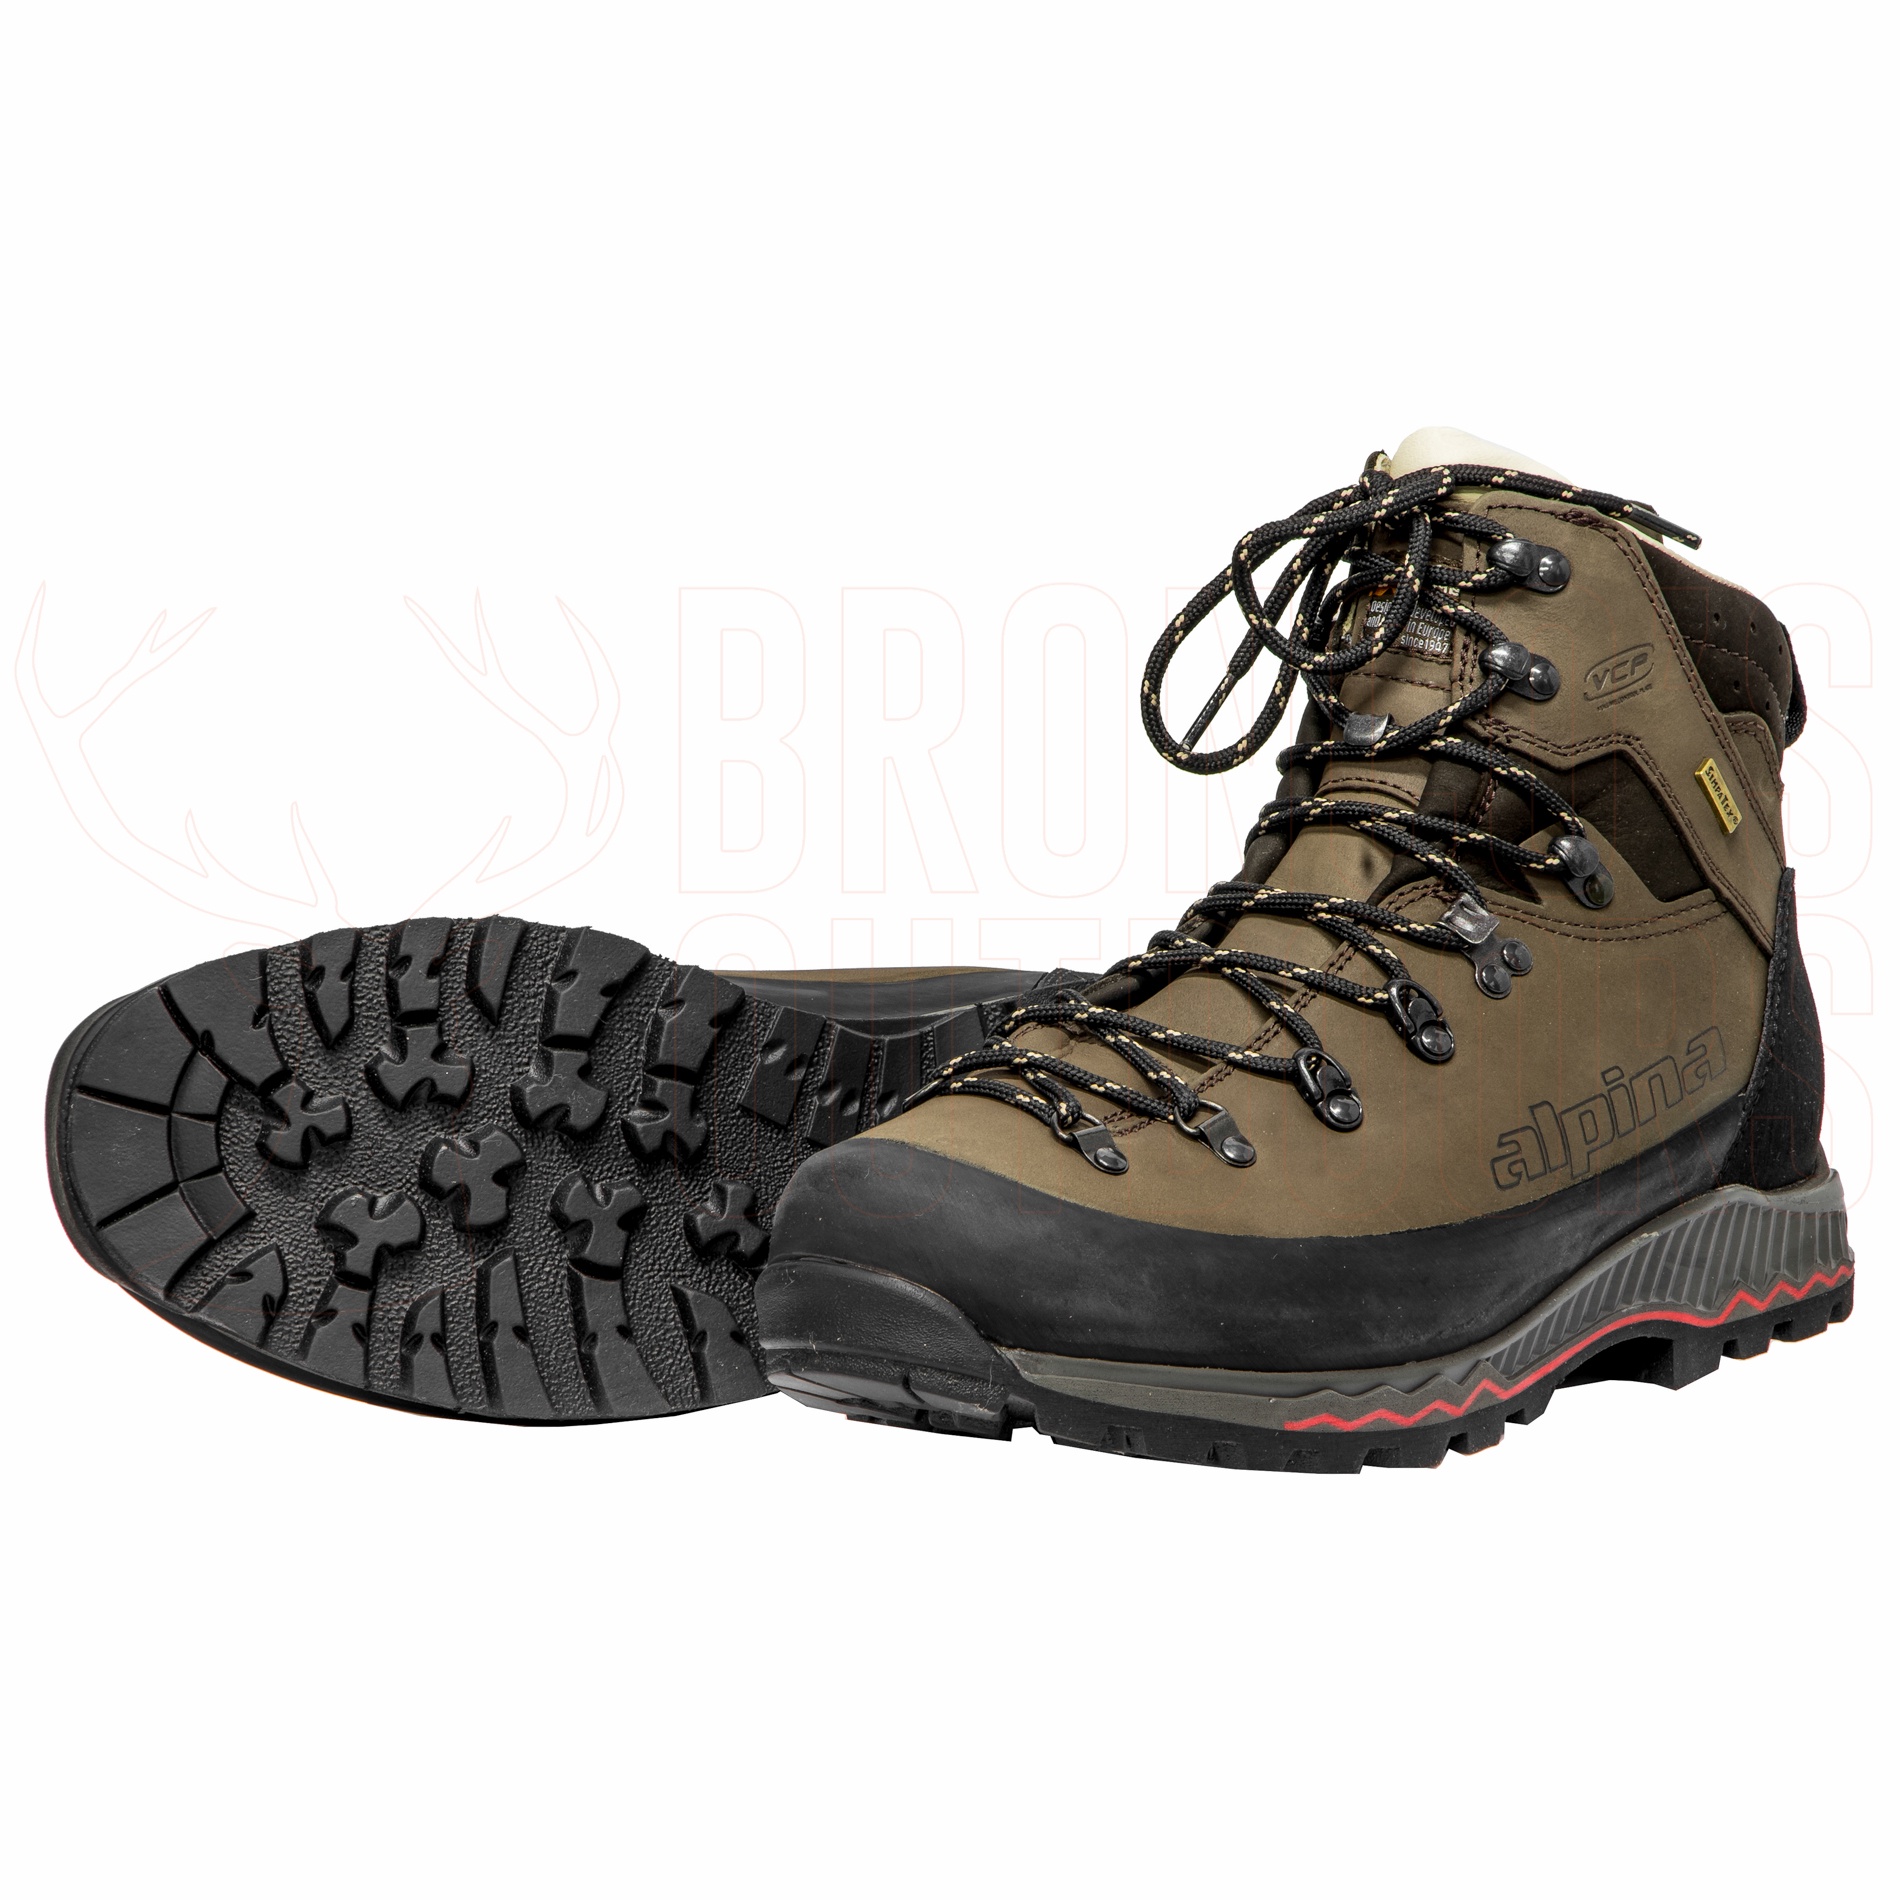 alpina hiking boots review